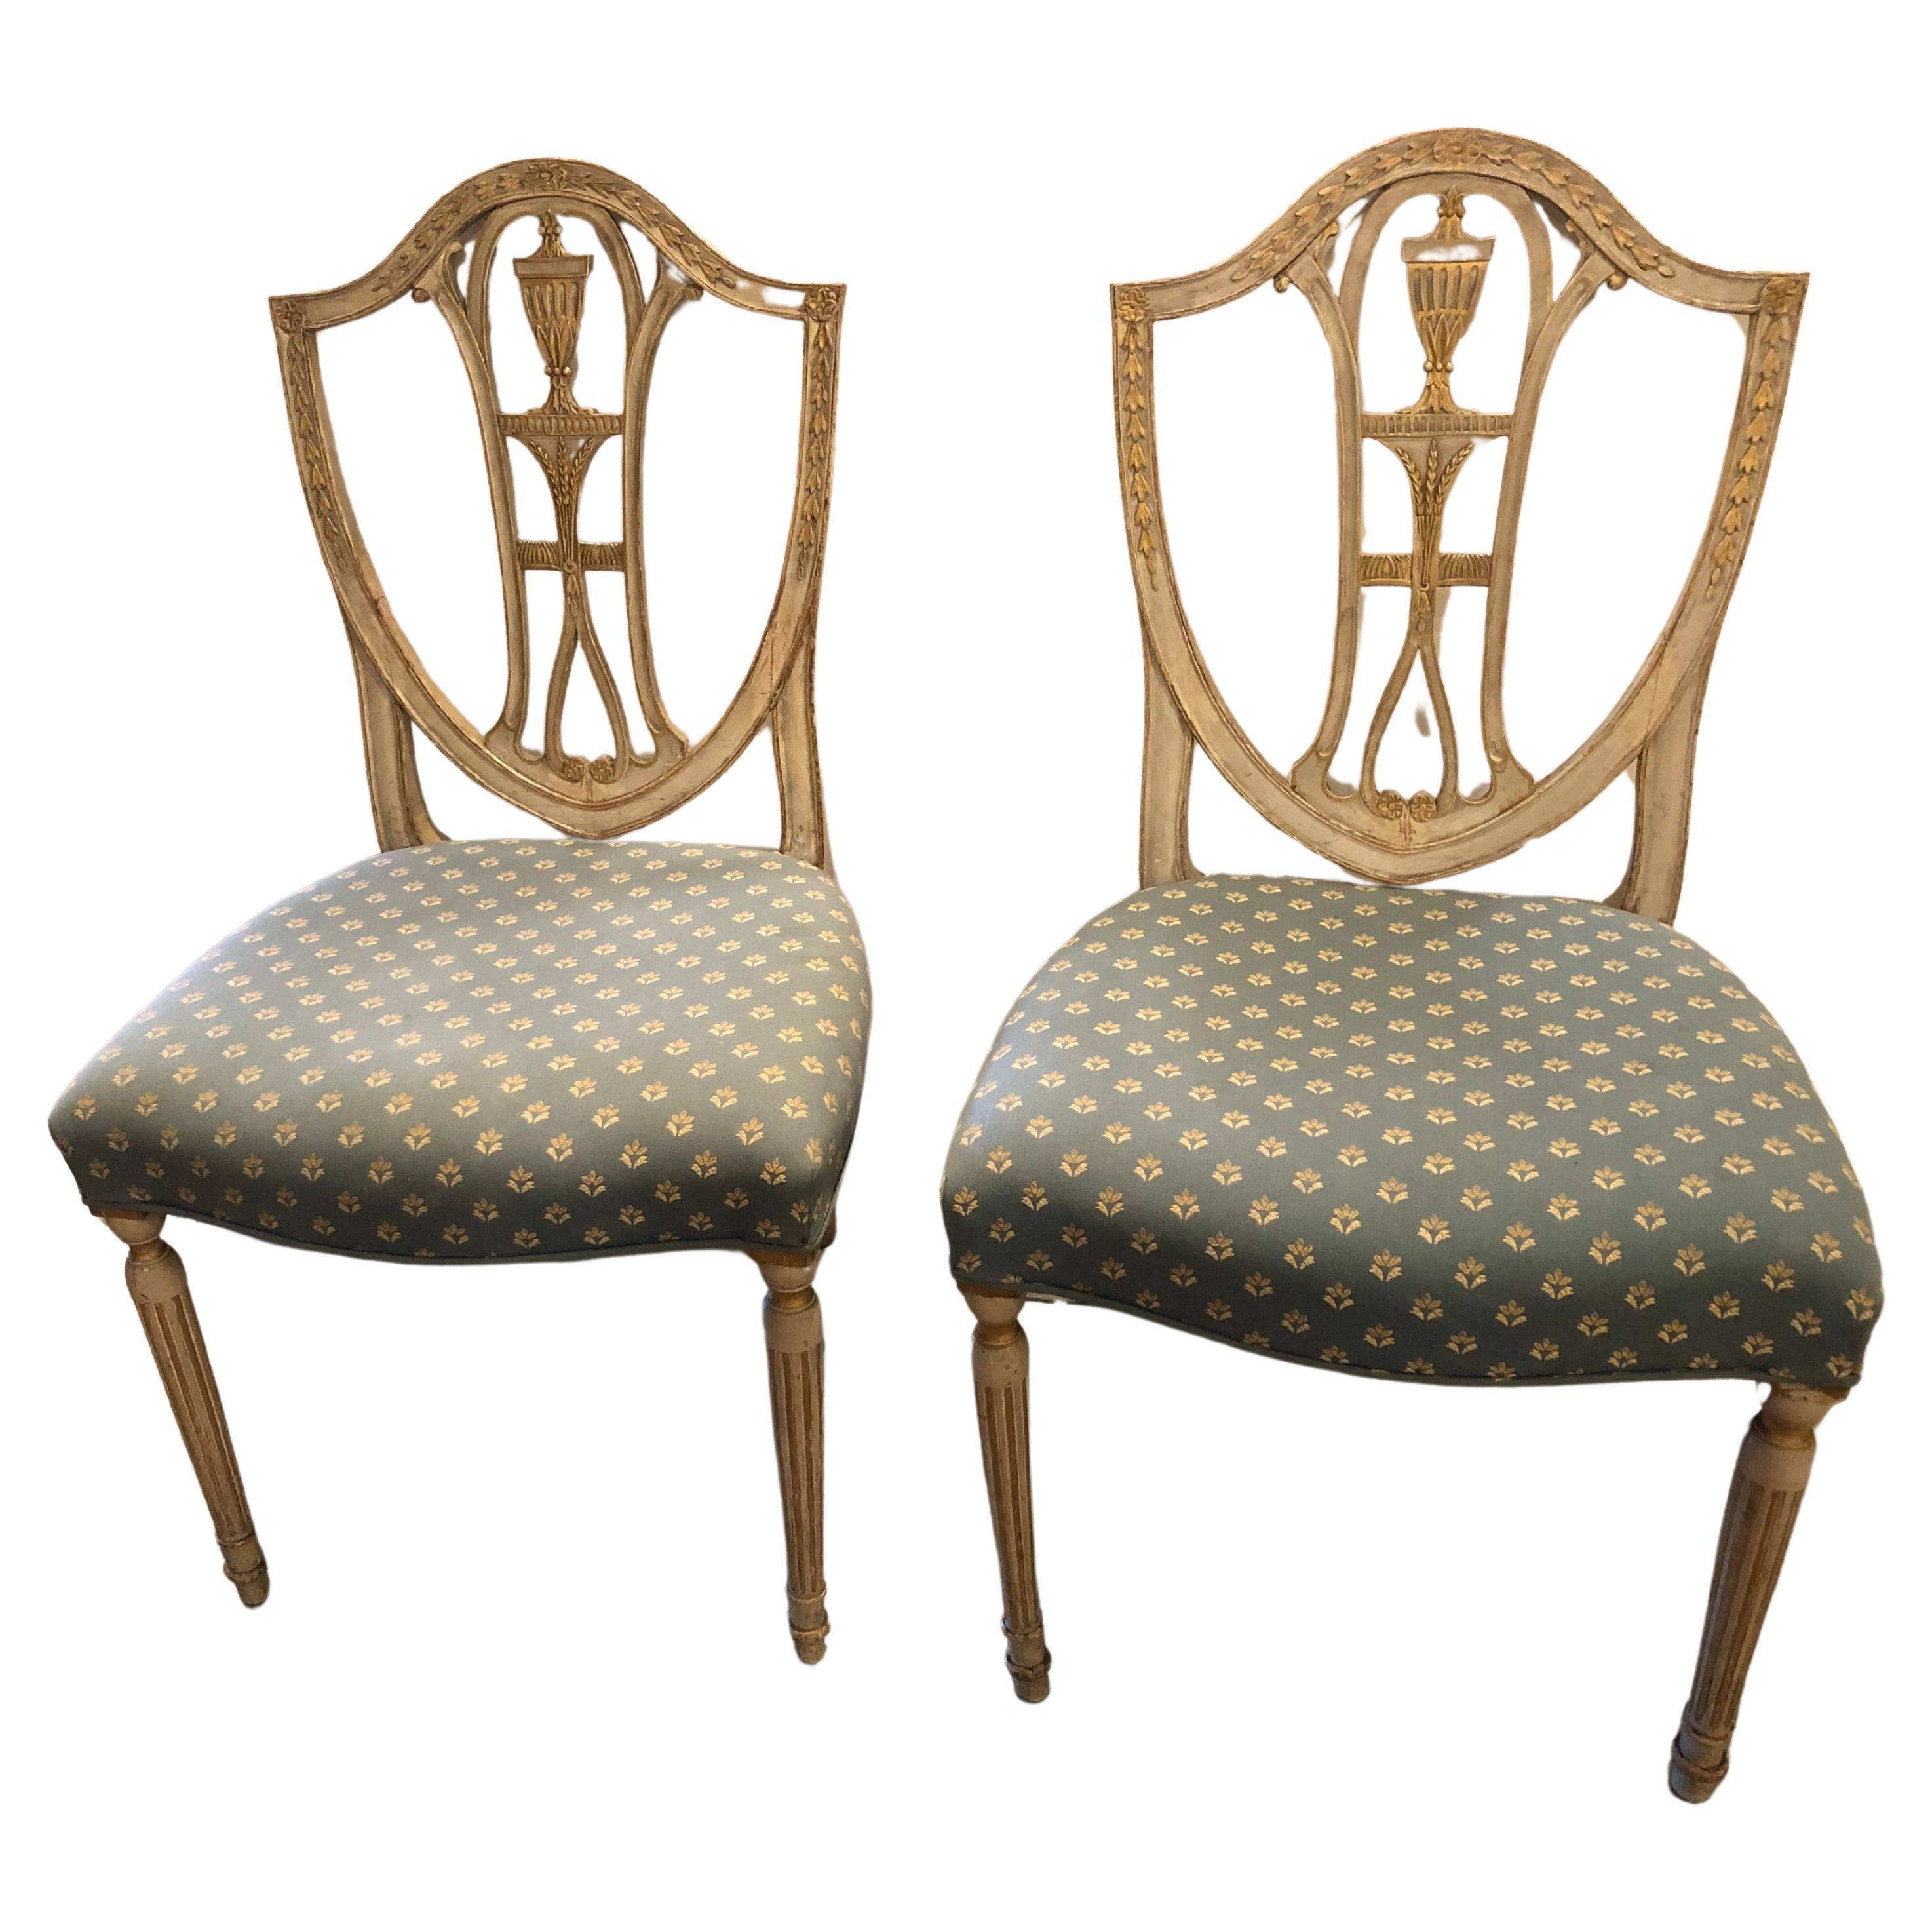 Lovely Pair of Painted 18th century Neoclassical Side Chairs  For Sale